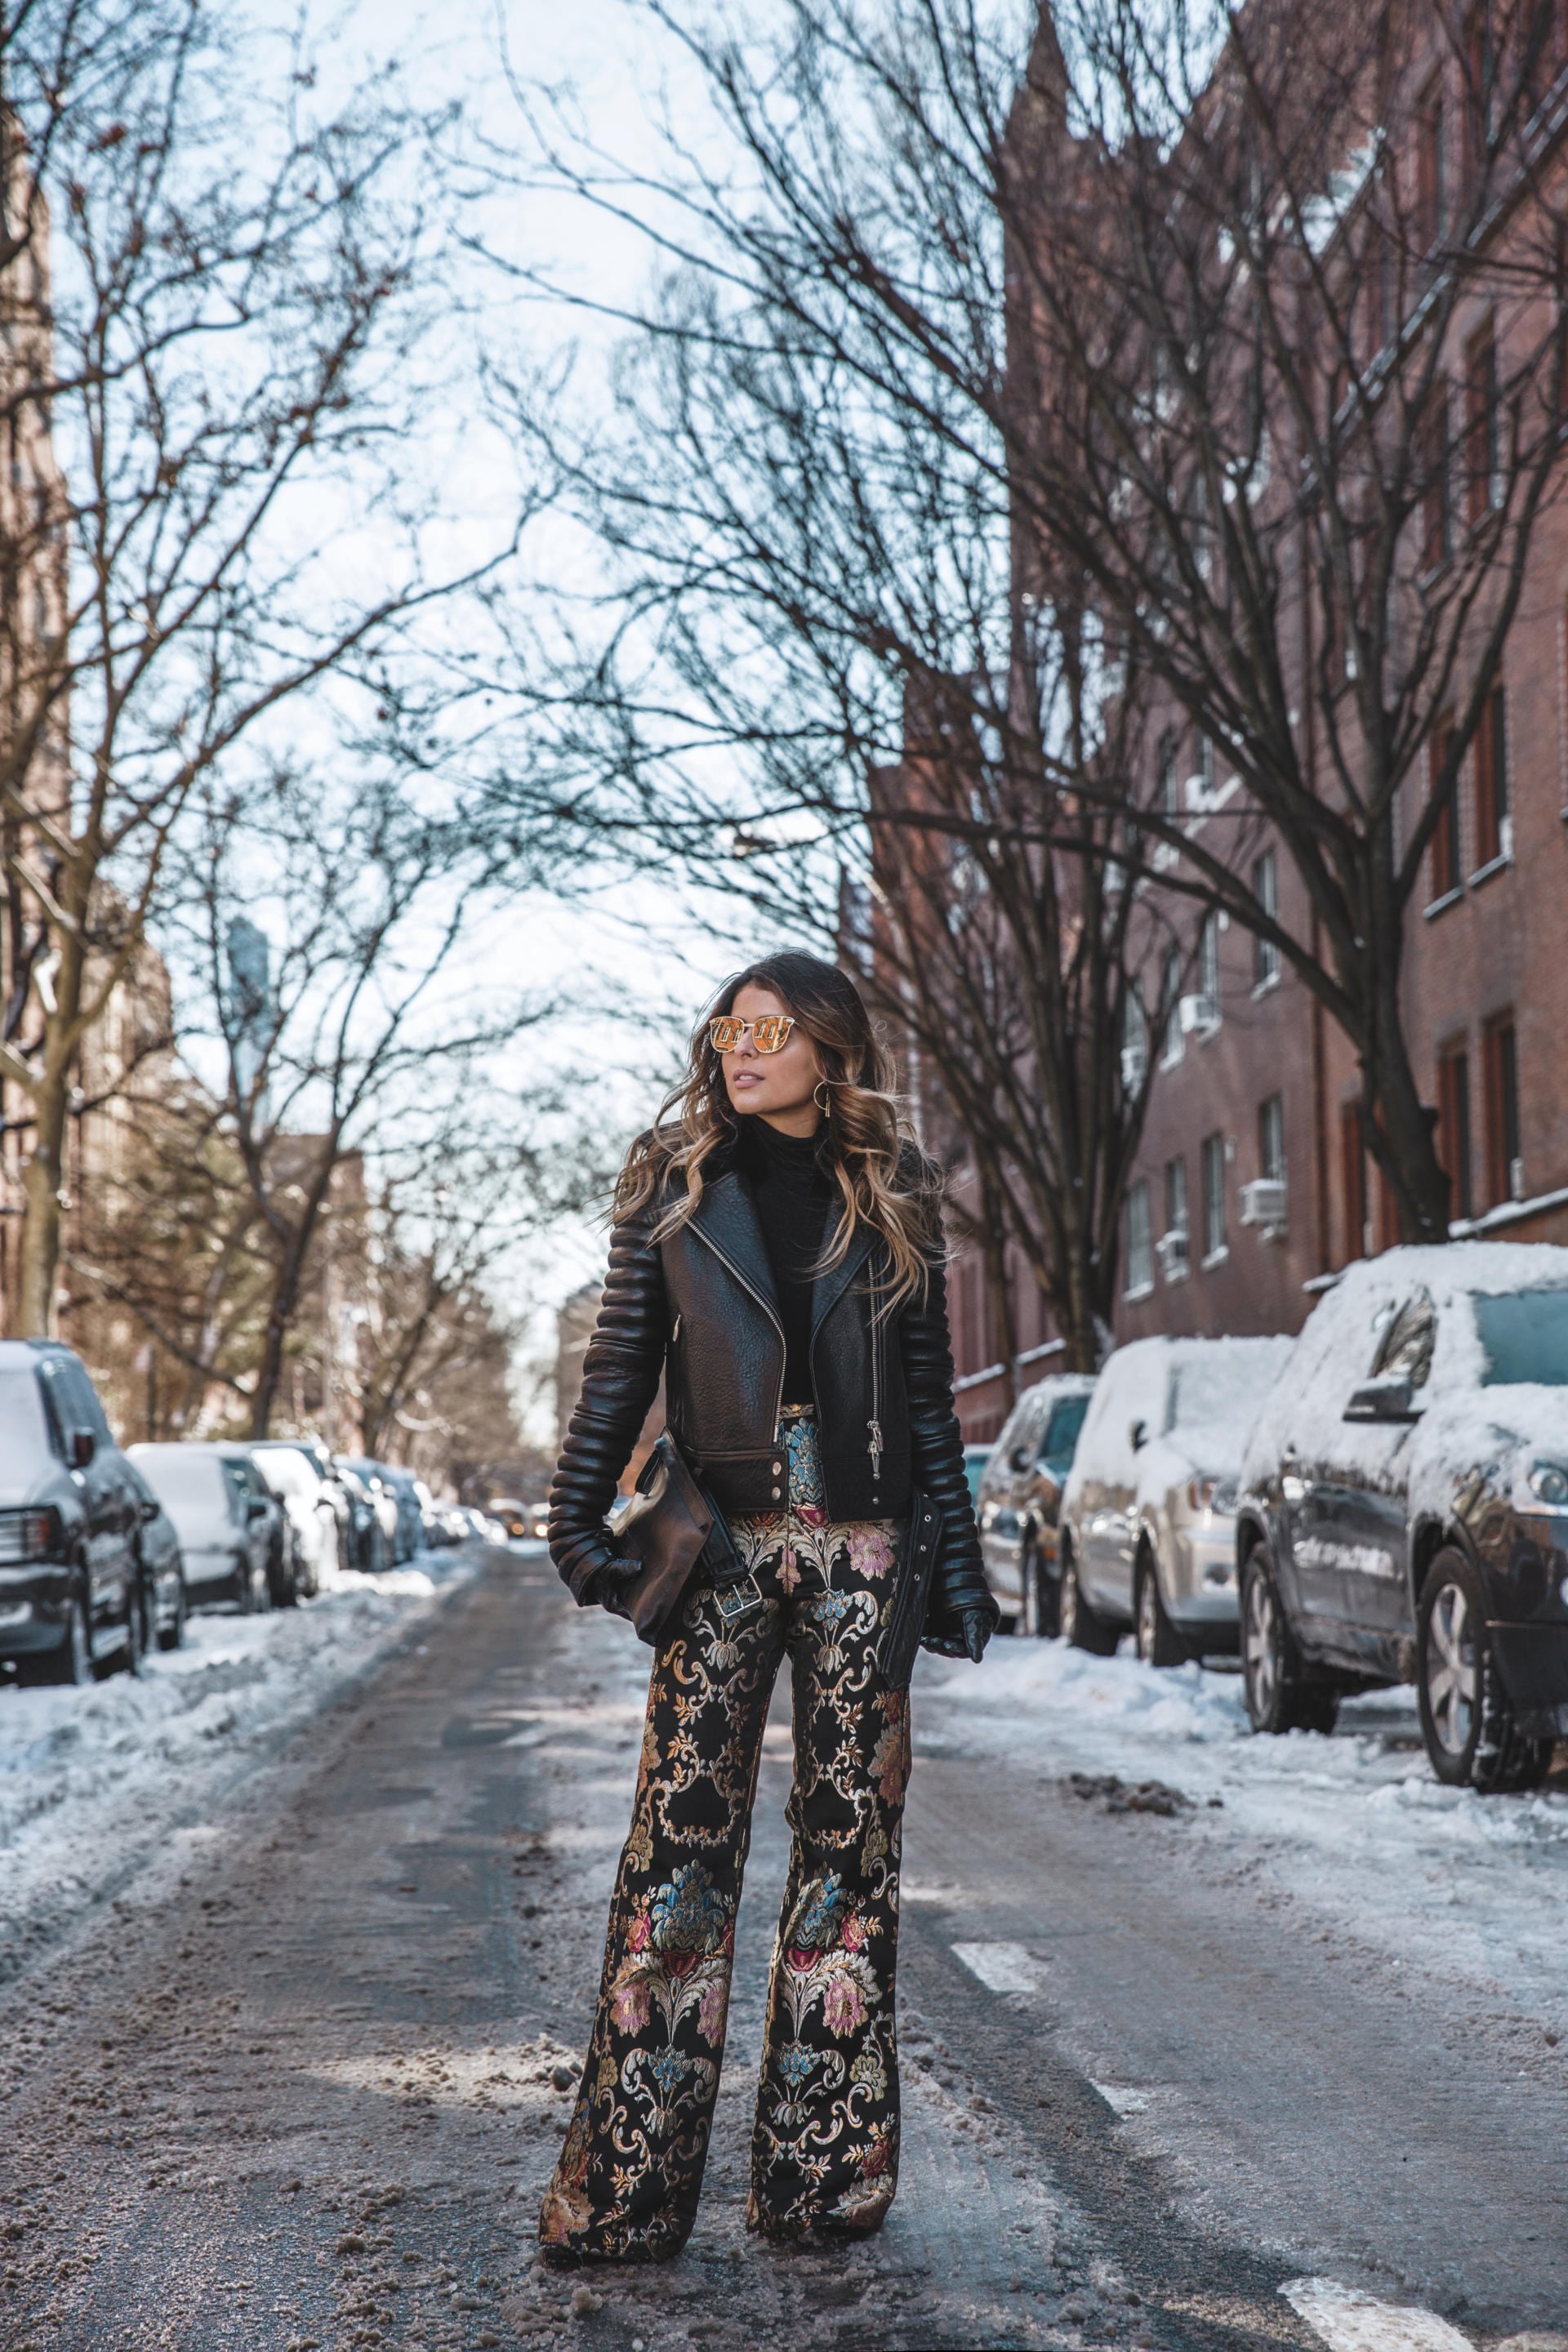 The arrivals leather jacket, lpa printed pants, nyfw, winter outfit | The Girl From Panama